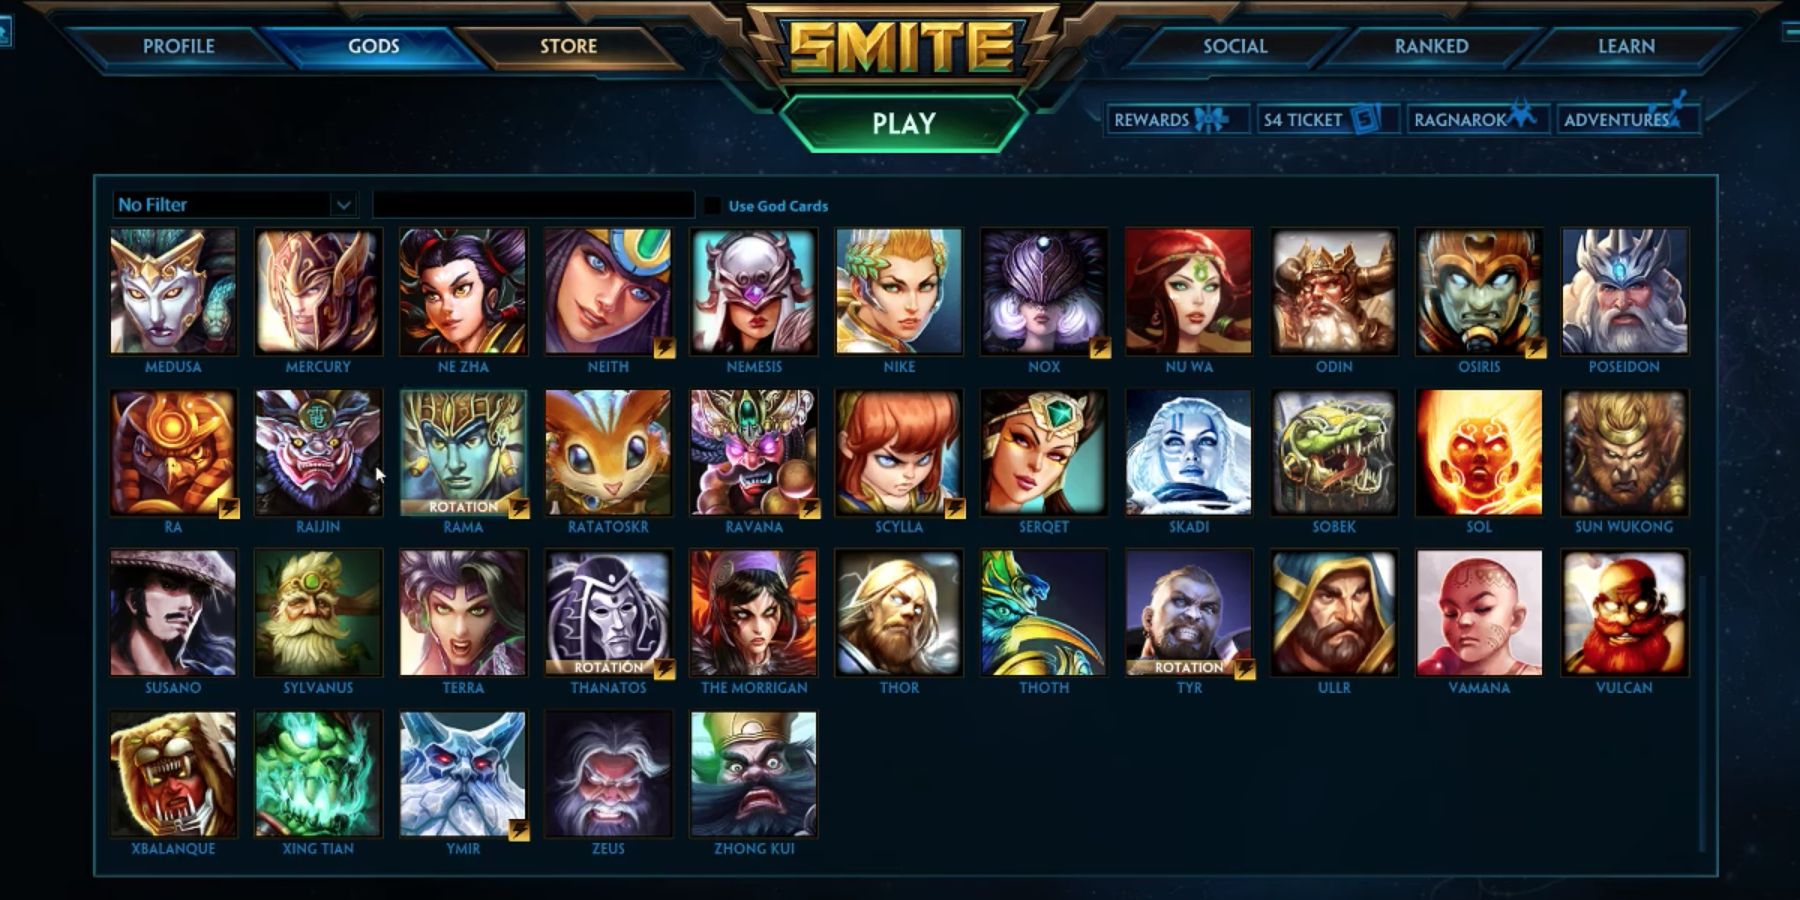 How to Earn Free Gems in Smite